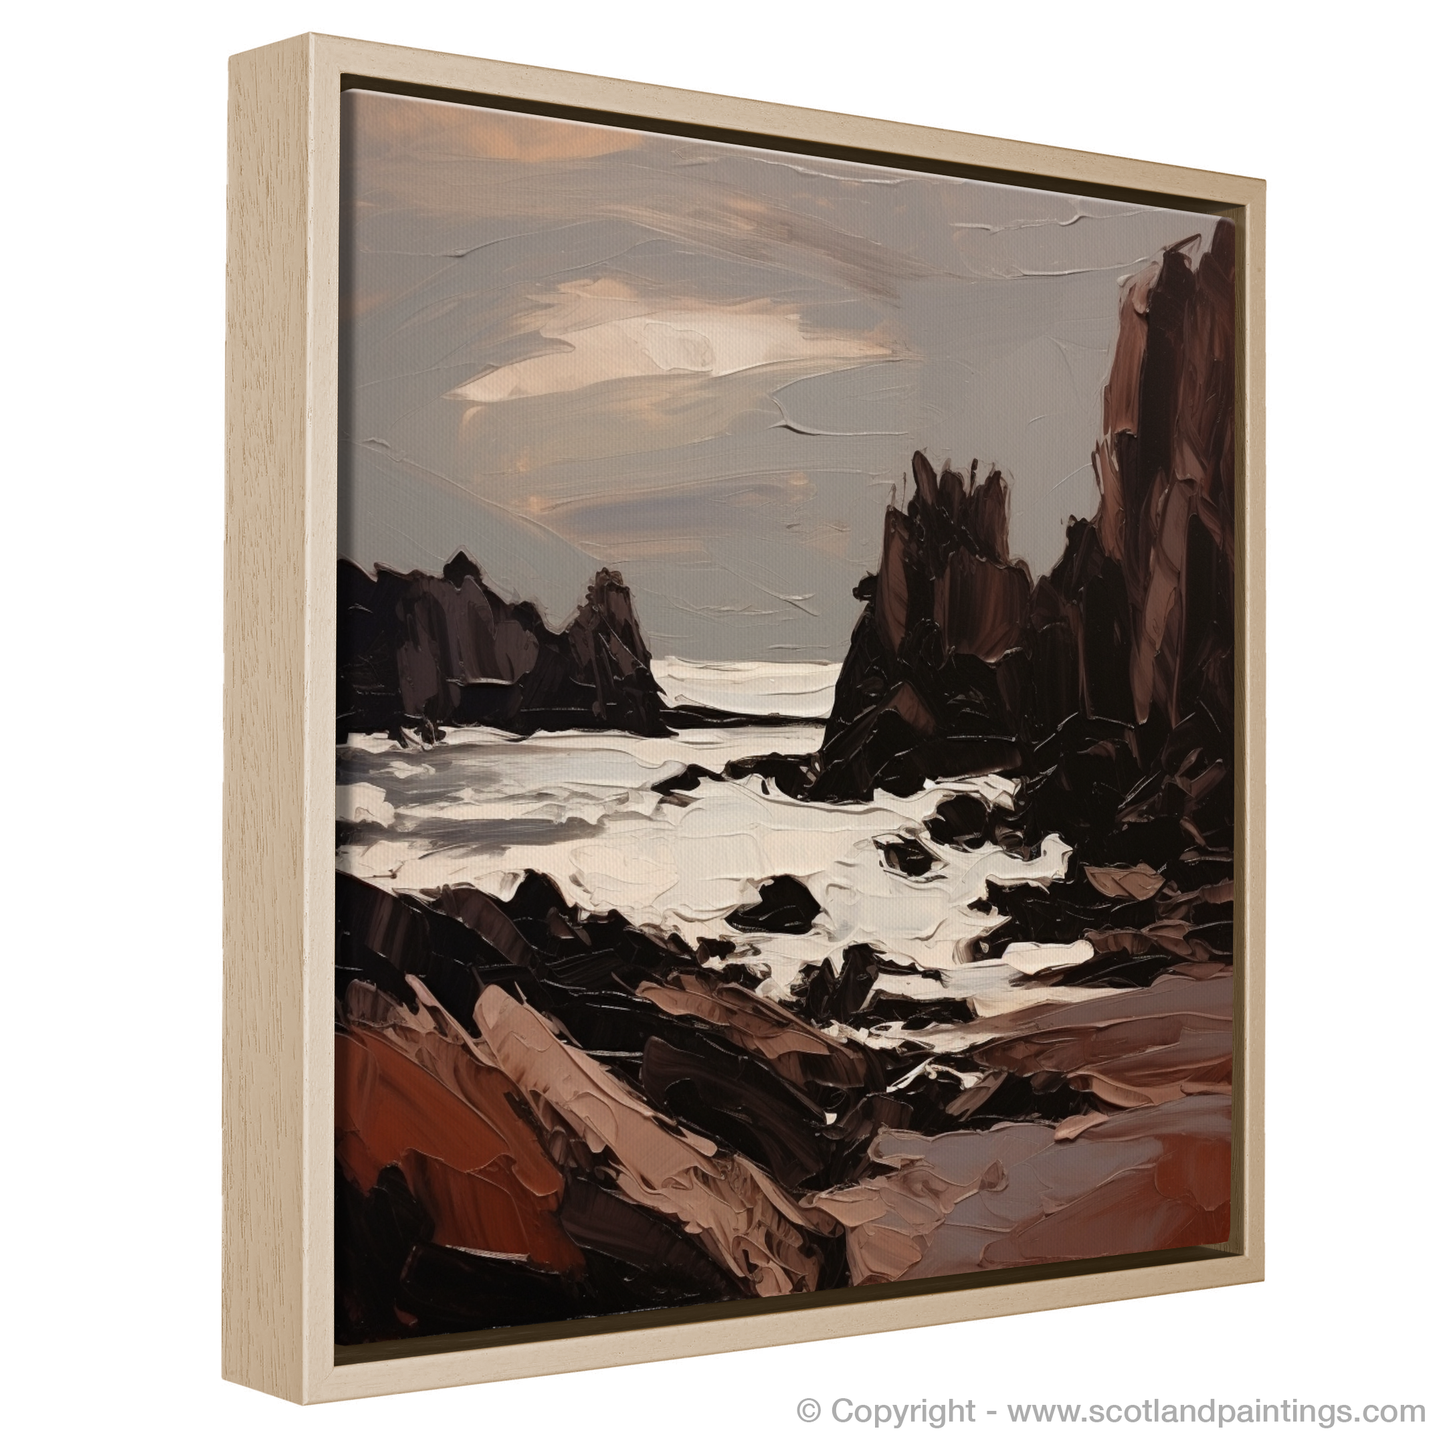 Painting and Art Print of Catterline Bay, Aberdeenshire entitled "Aberdeenshire's Coastal Fury: An Expressive Ode to Catterline Bay".